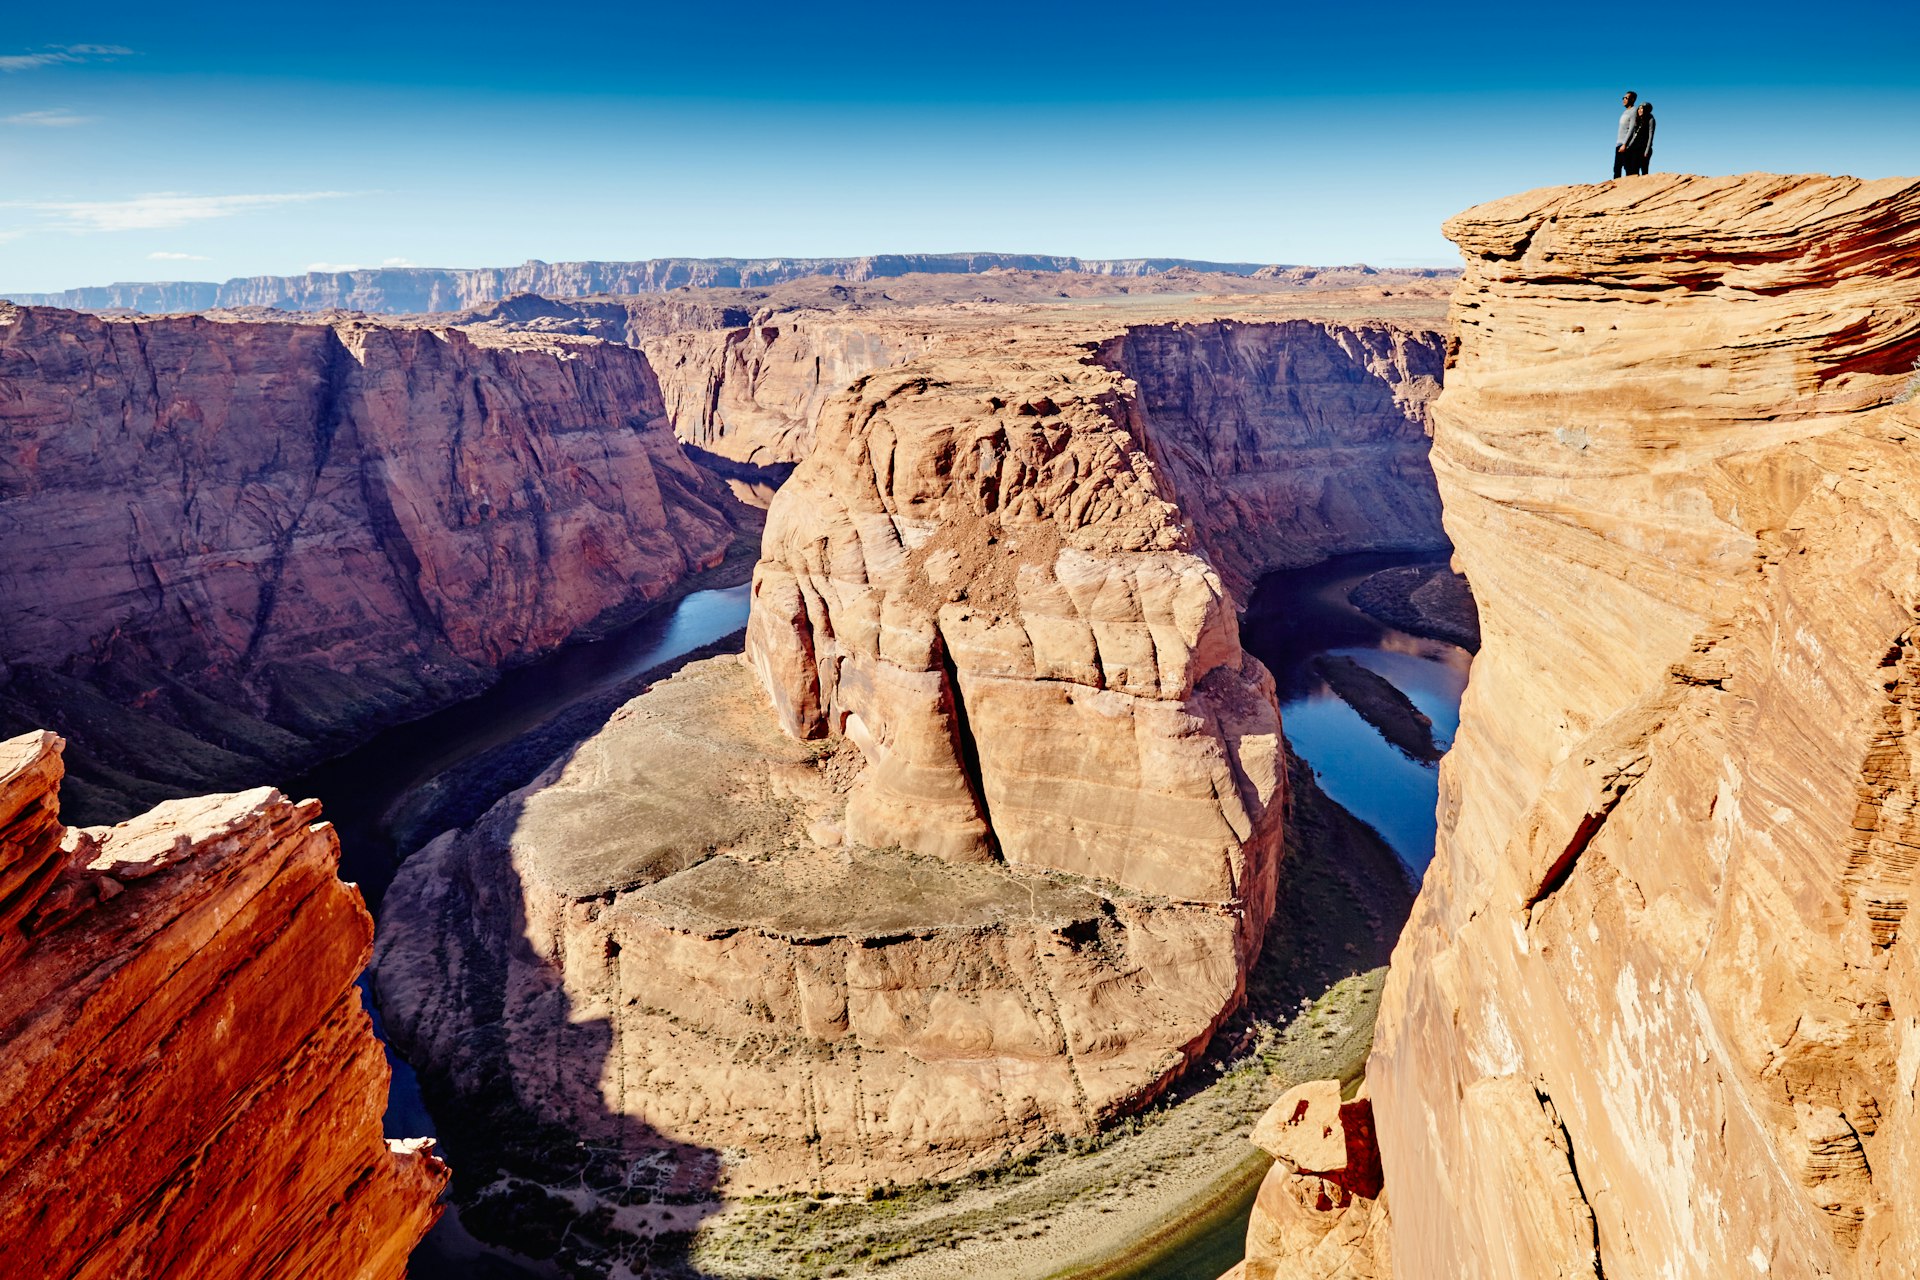 People standing on a cliff overlooking a horseshoe bend in a canyon river